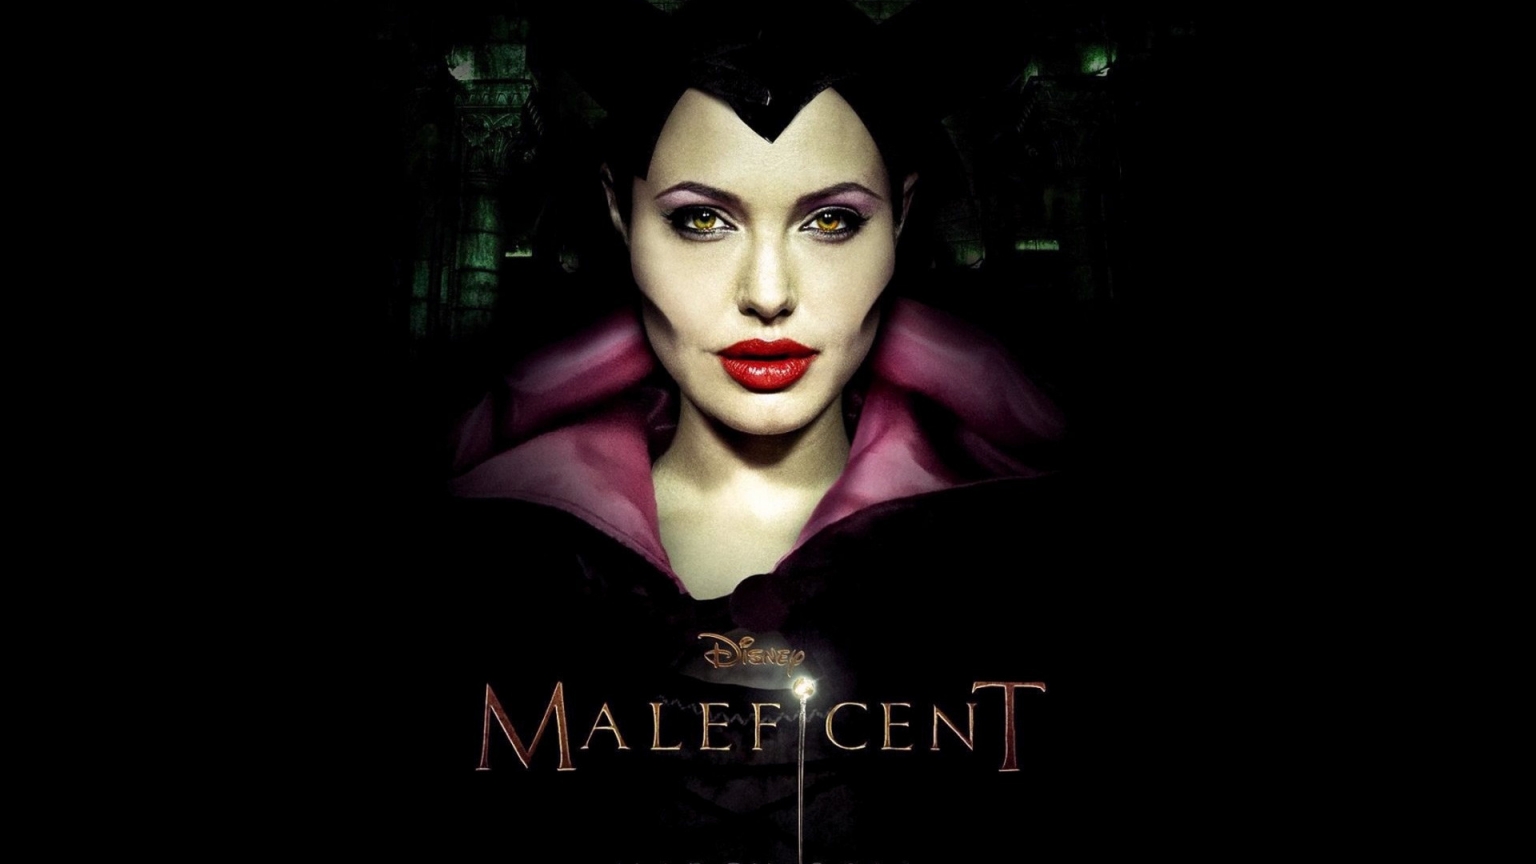 Maleficent for 1536 x 864 HDTV resolution